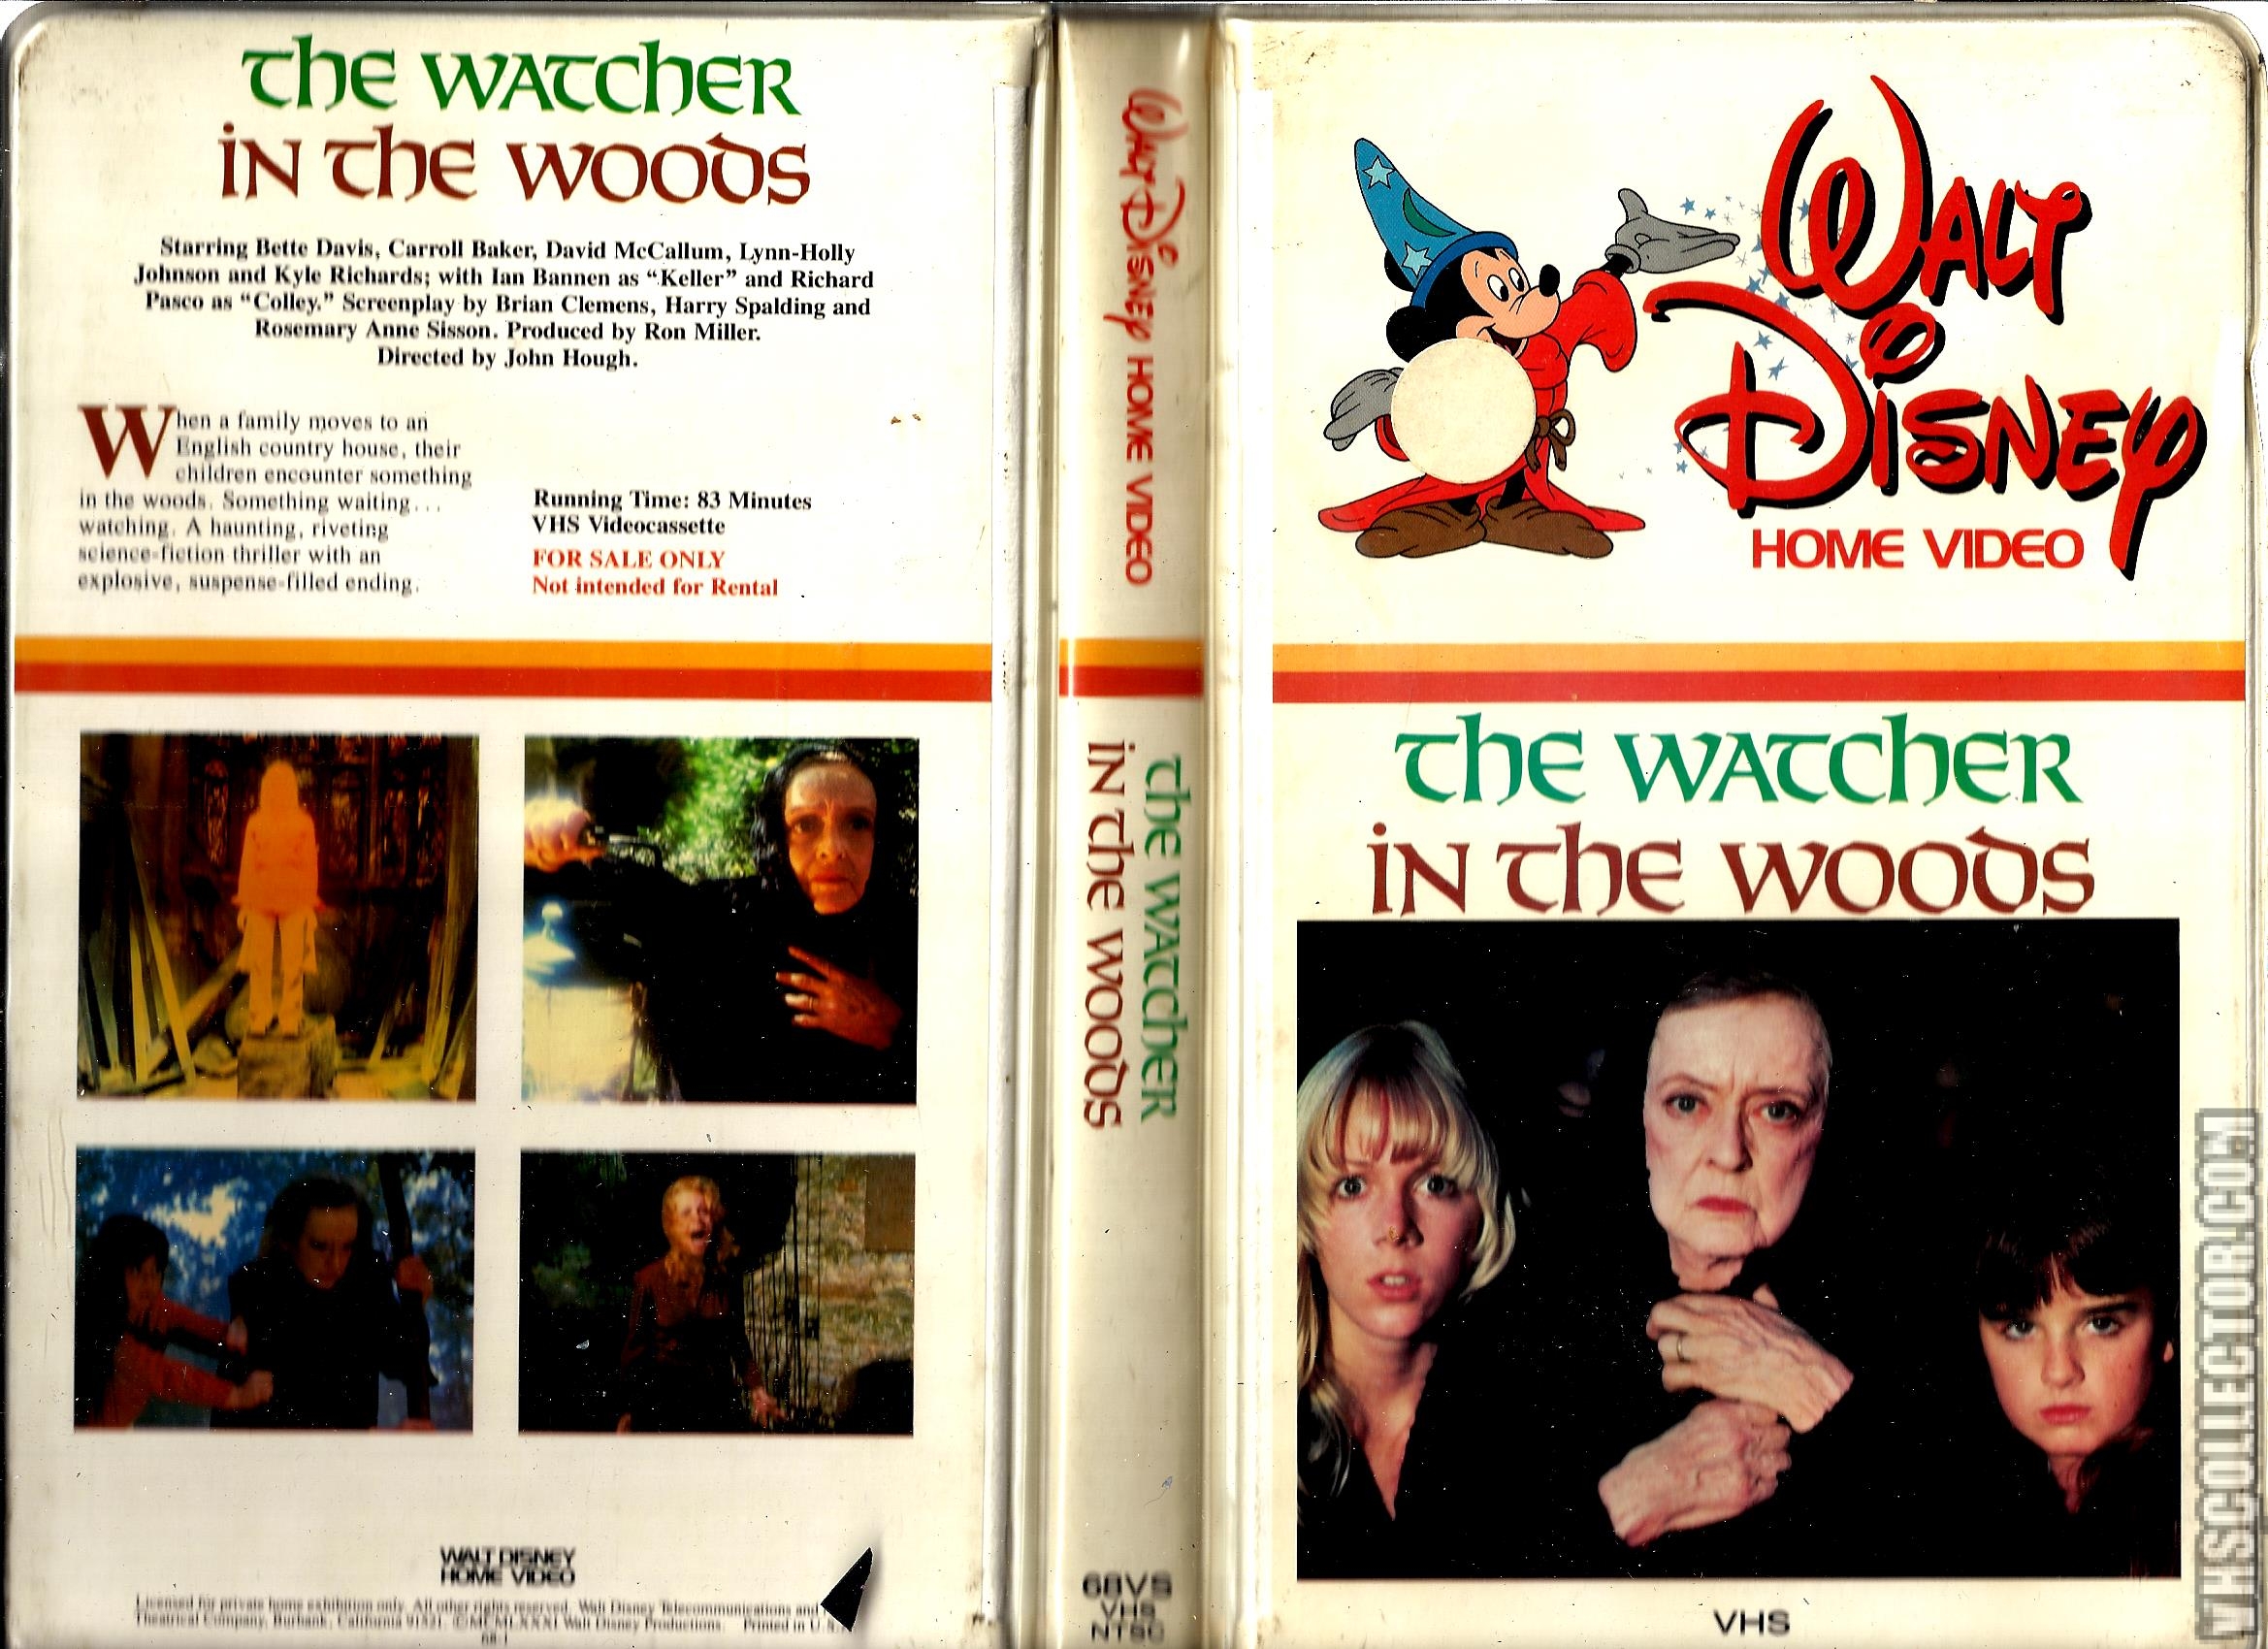 The Watcher in the Woods | VHSCollector.com